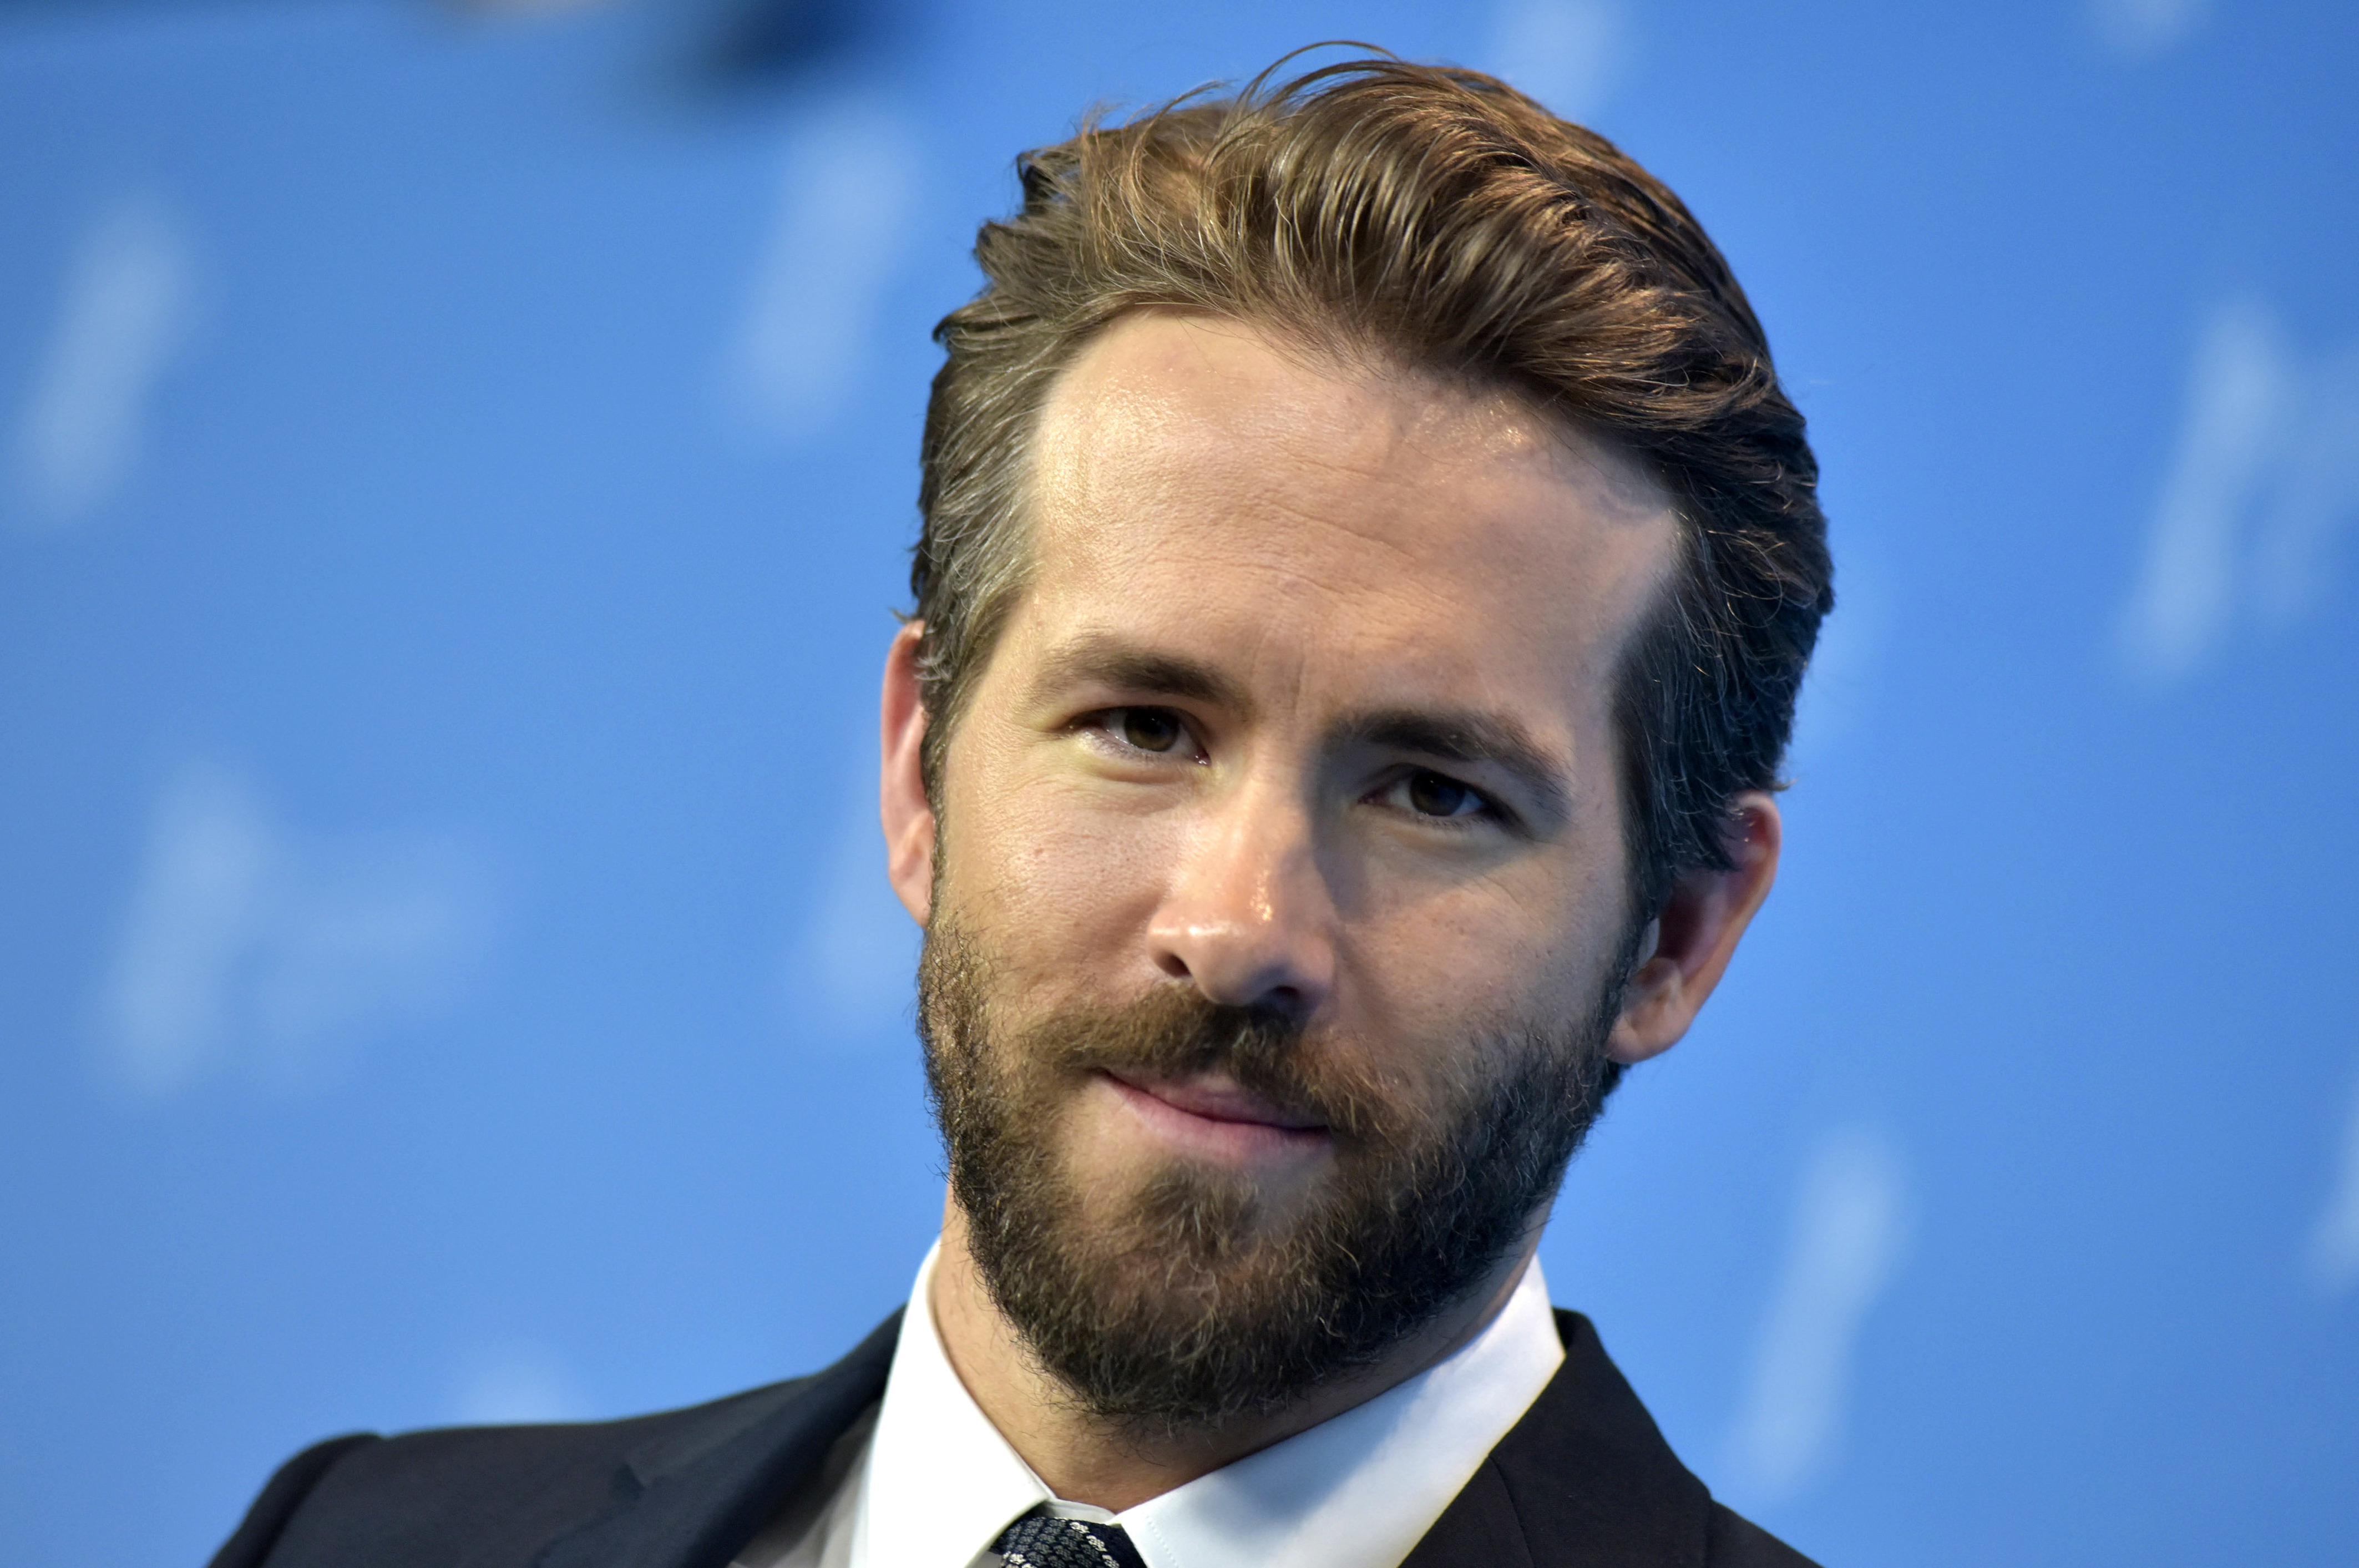 65th Berlin International Film Festival (Berlinale) - 'Woman In Gold' - Photocall Featuring: Ryan Reynolds Where: Berlin, Germany When: 09 Feb 2015 Credit: Snapshot/Tobias Seeliger/Future Image/WENN.com **Not available for publication in Germany, Poland, Russia, Hungary, Slovenia, Czech Republic, Serbia, Croatia, Slovakia**